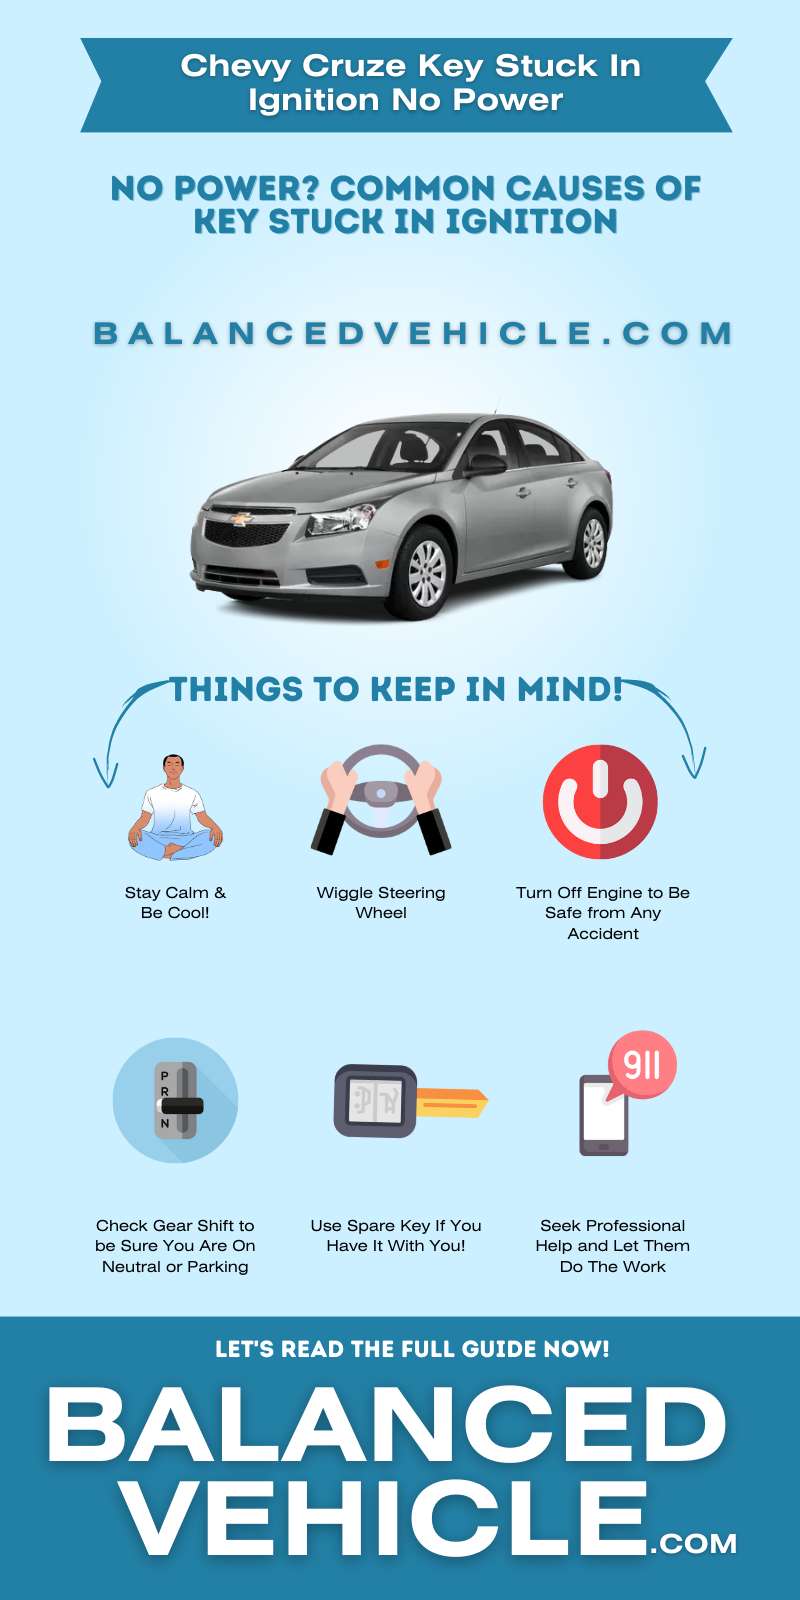 Chevy Cruze Key Stuck In Ignition No Power - Infographic